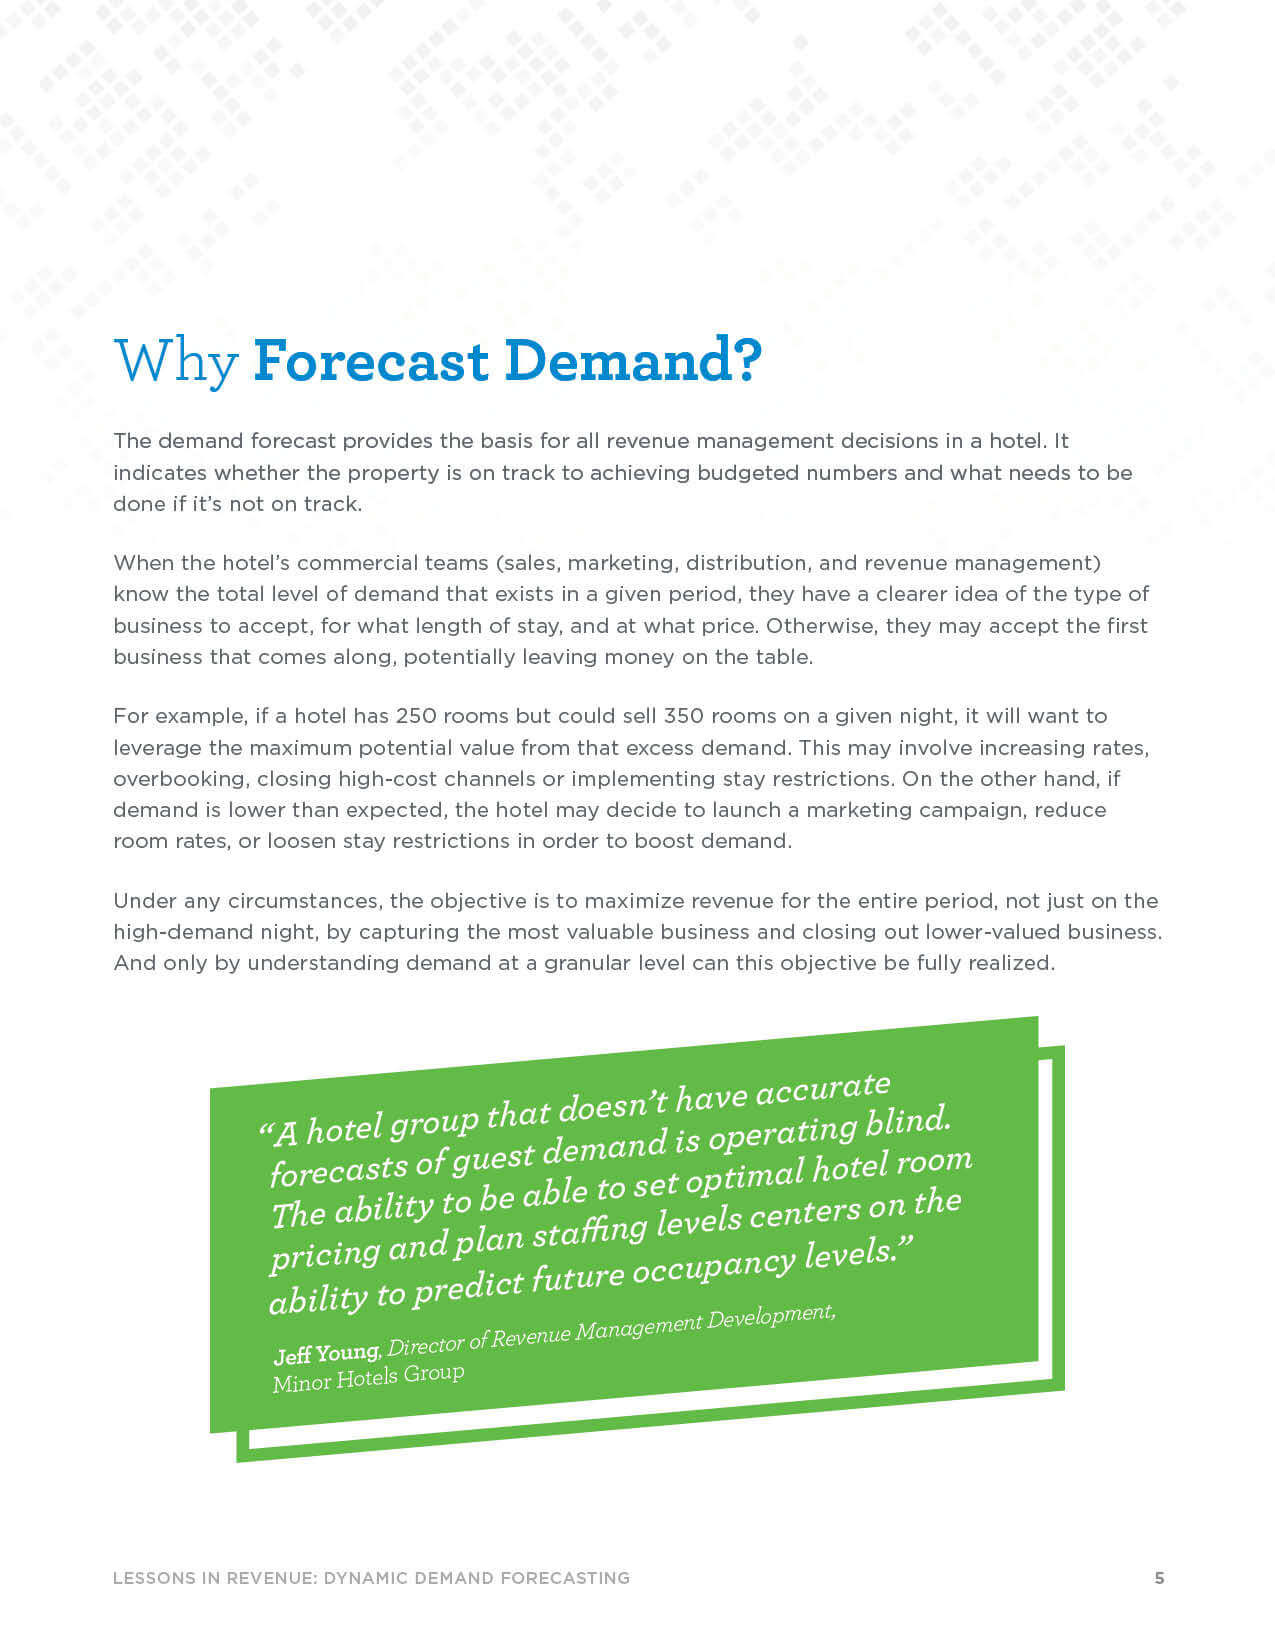 Page 5 - Why Forecast Demand?